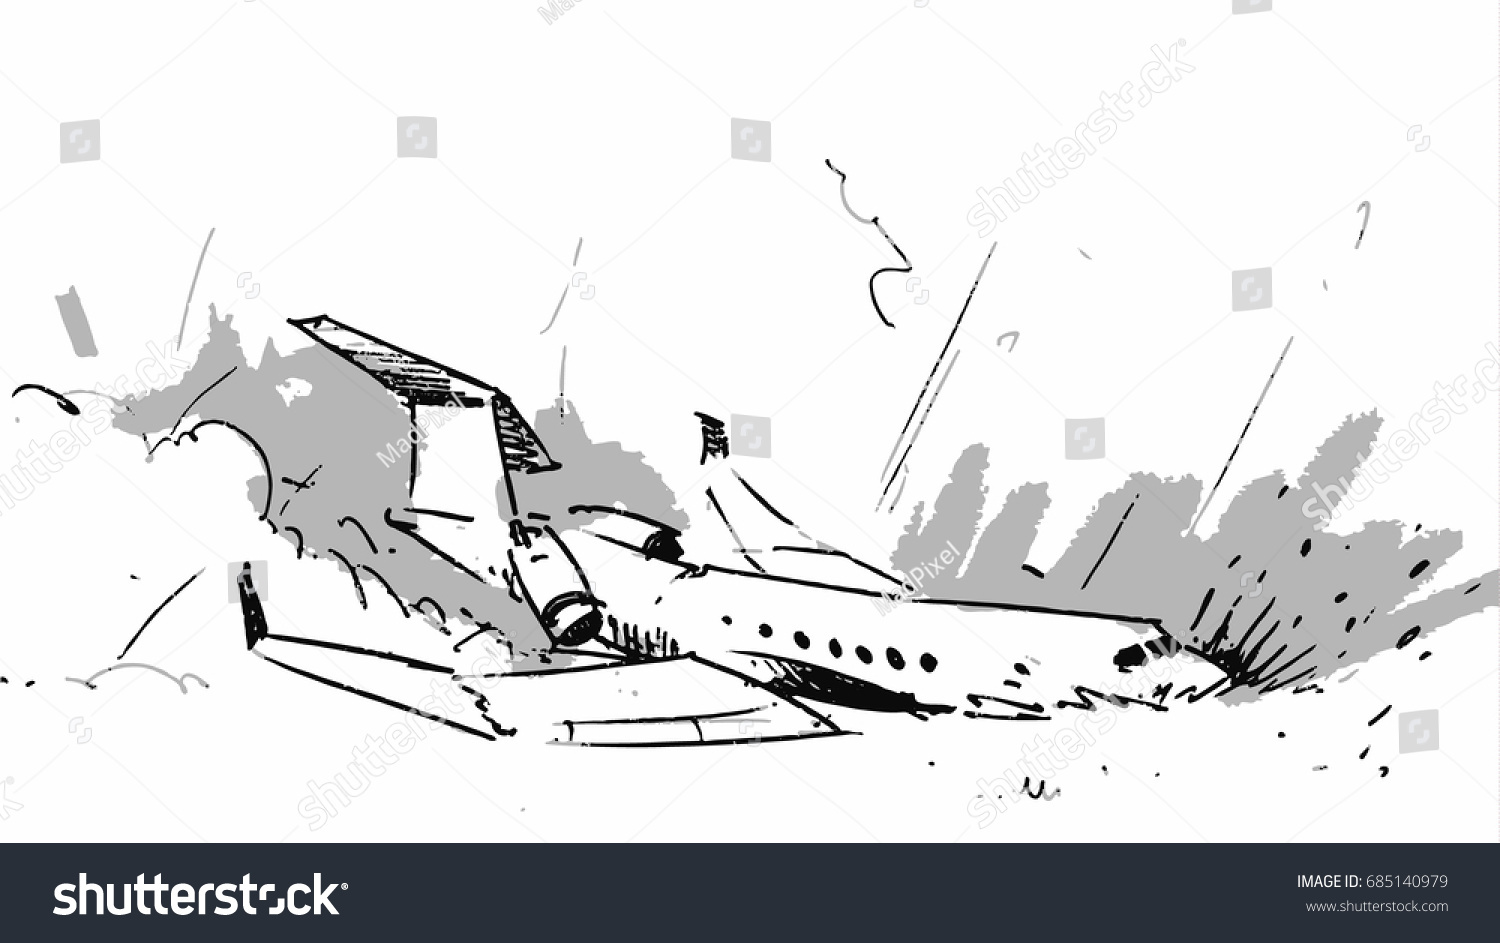 How To Draw A Plane Crash Step By Step DRAWING TUTORIALS